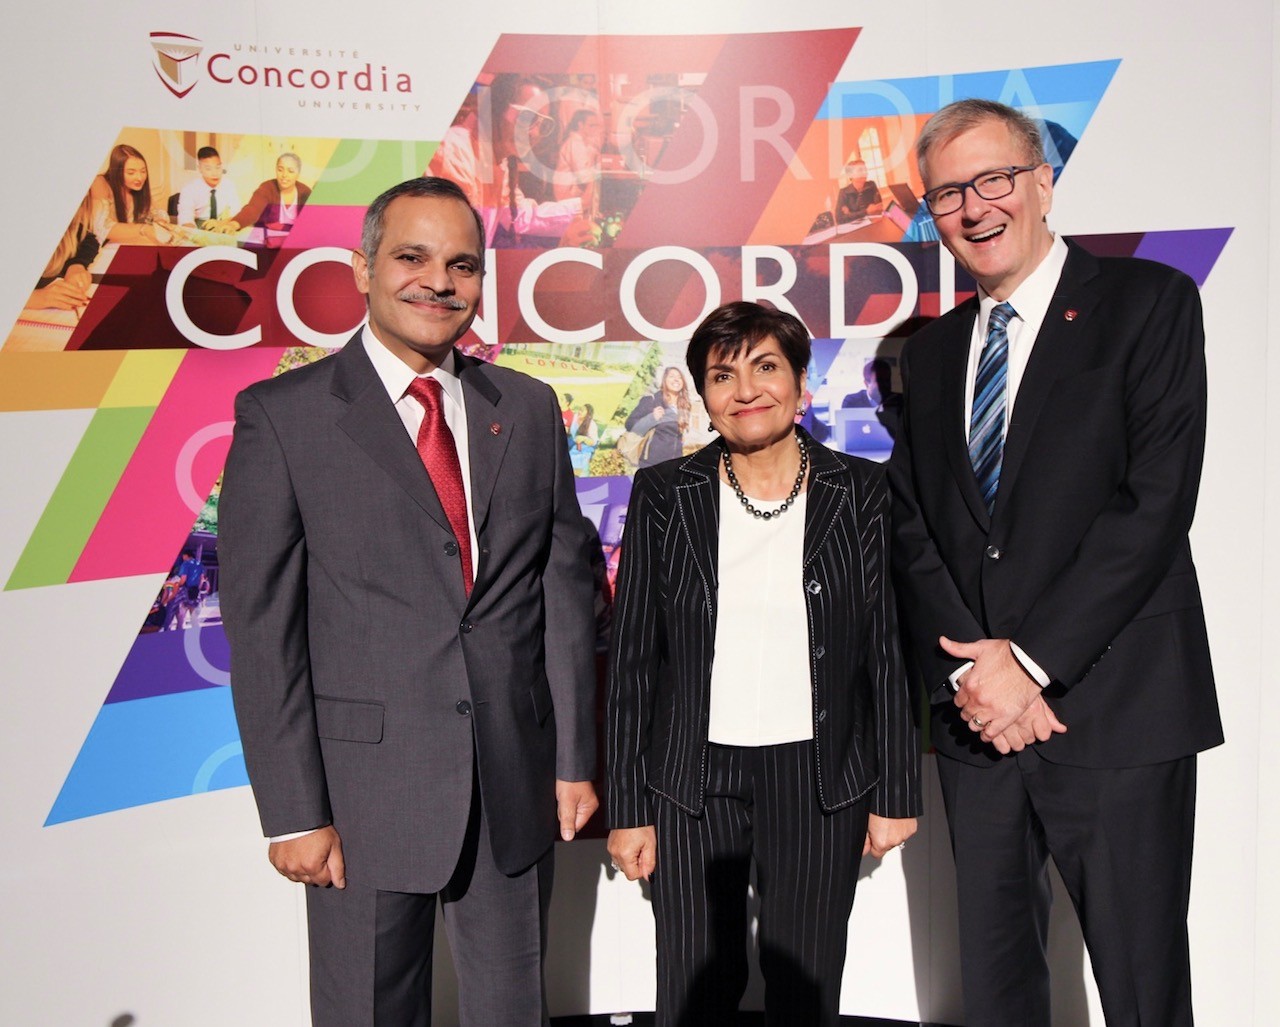 Concordia donor Gina Cody, with the university’s president Alan Shepard (right) and Amir Asif (left), dean of the Gina Cody School of Engineering and Computer Science.